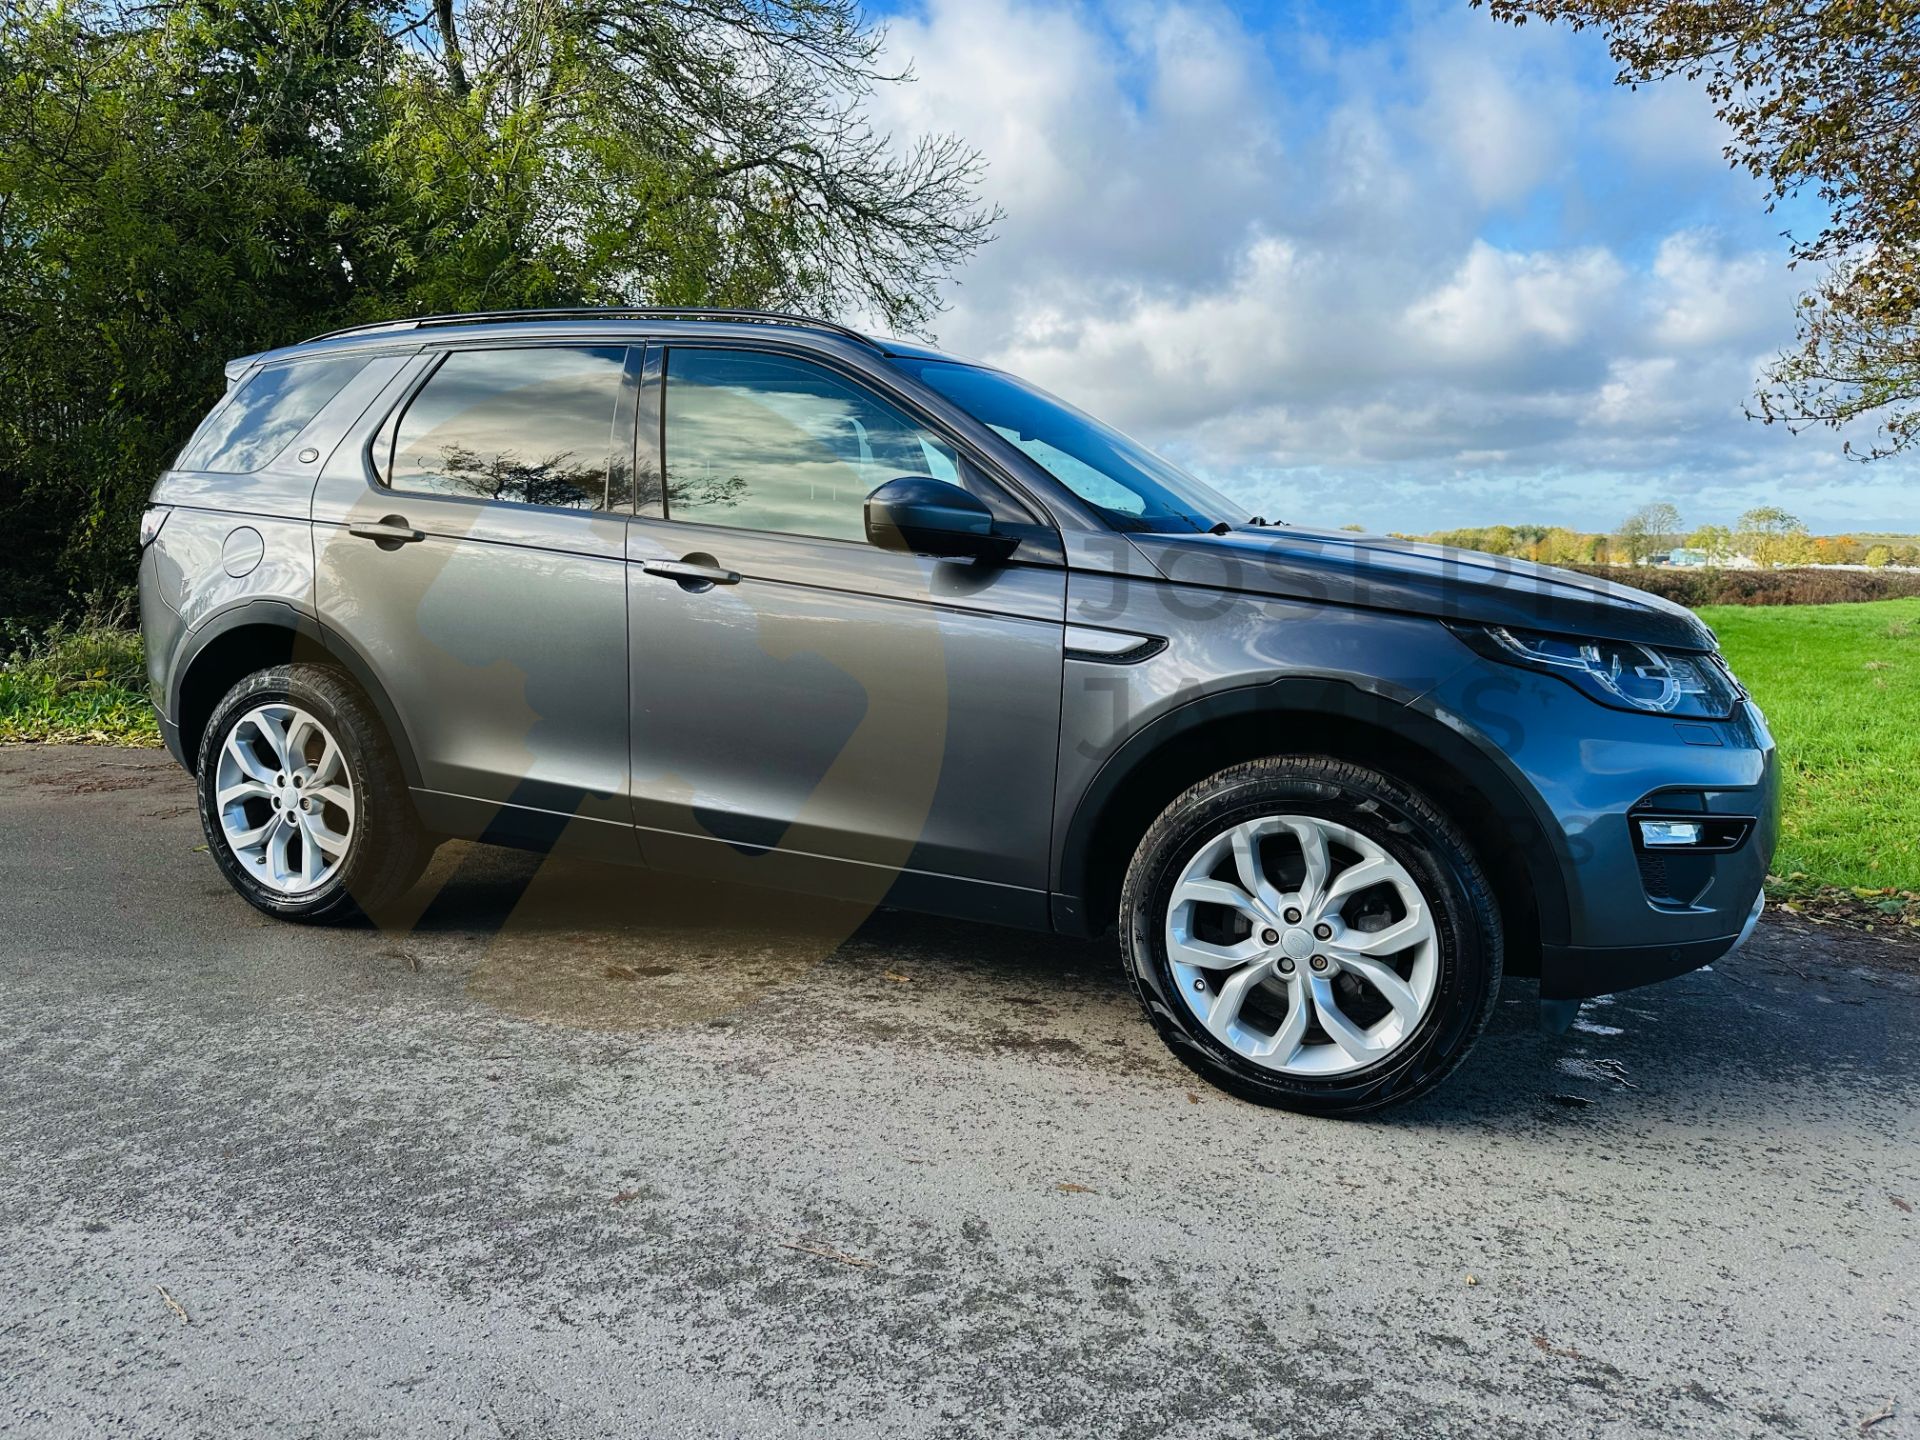 (ON SALE) LAND ROVER DISCOVERY SPORT *HSE EDITION* 7 SEATER SUV (2016 MODEL) 2.0 TD4-AUTO STOP/START